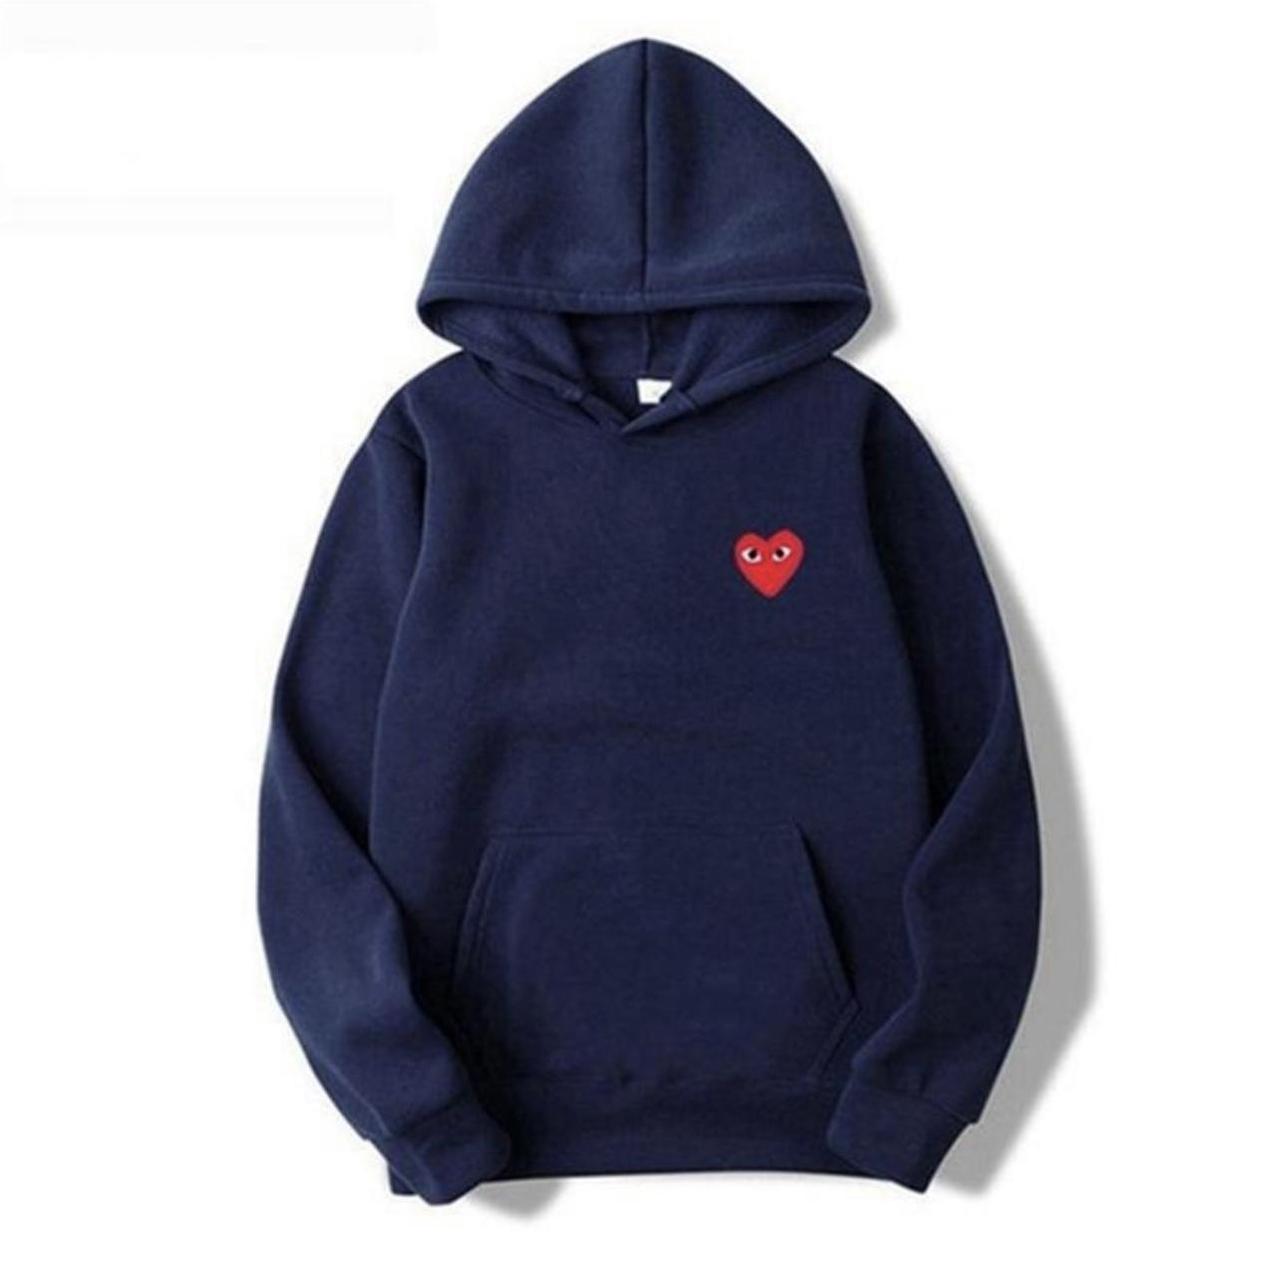 Navy Blue CDG Hoodie (oversized) Brand new and never... - Depop